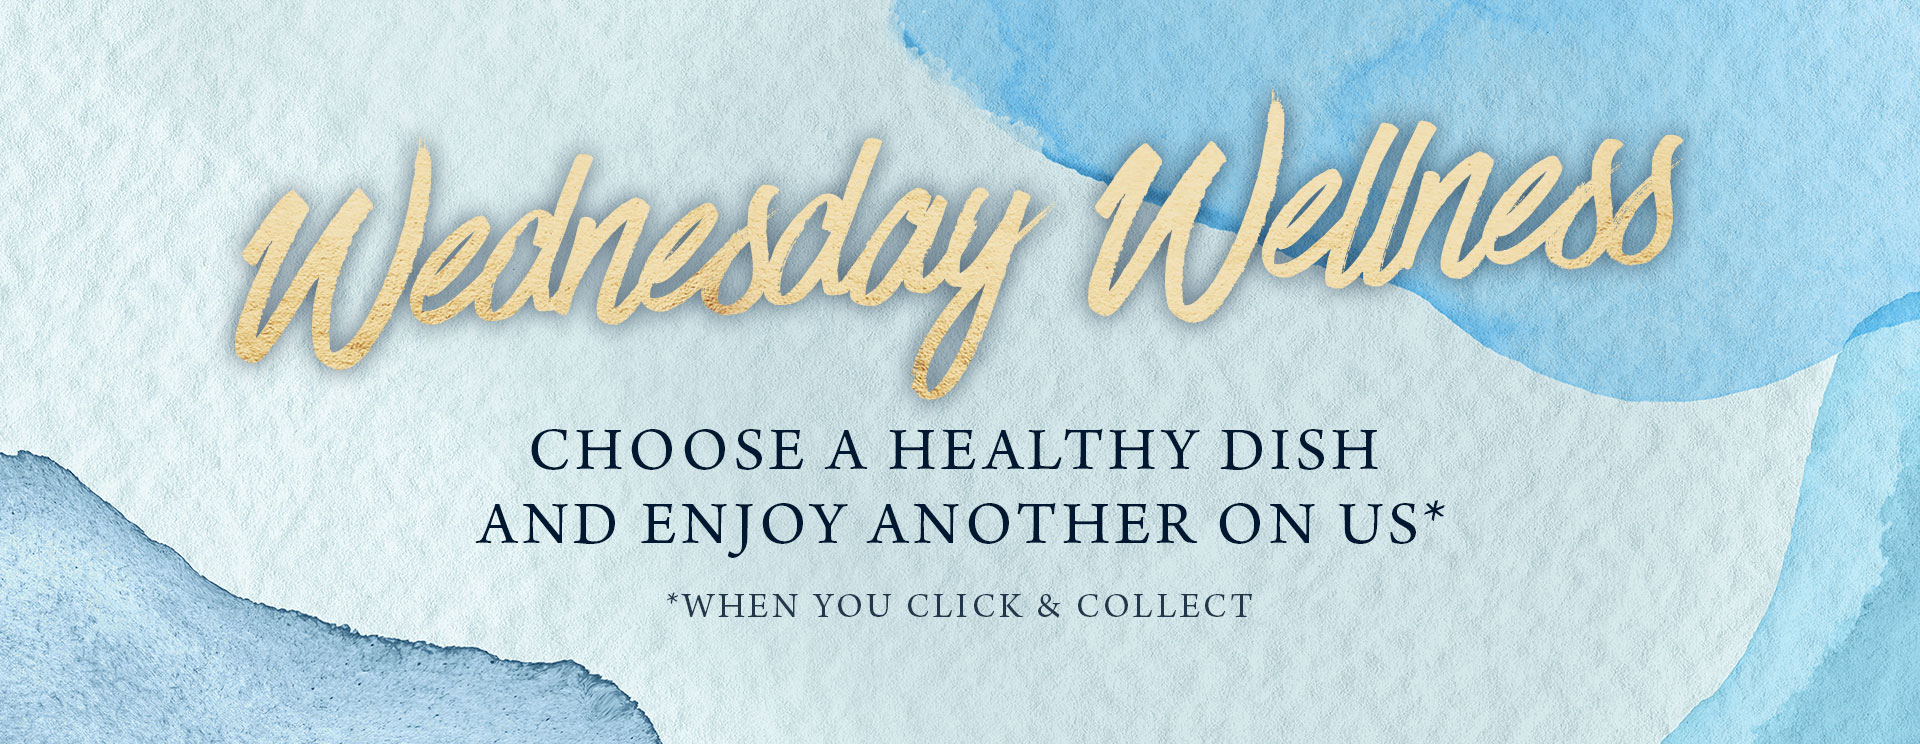 Wednesday Wellness at The Rose & Crown